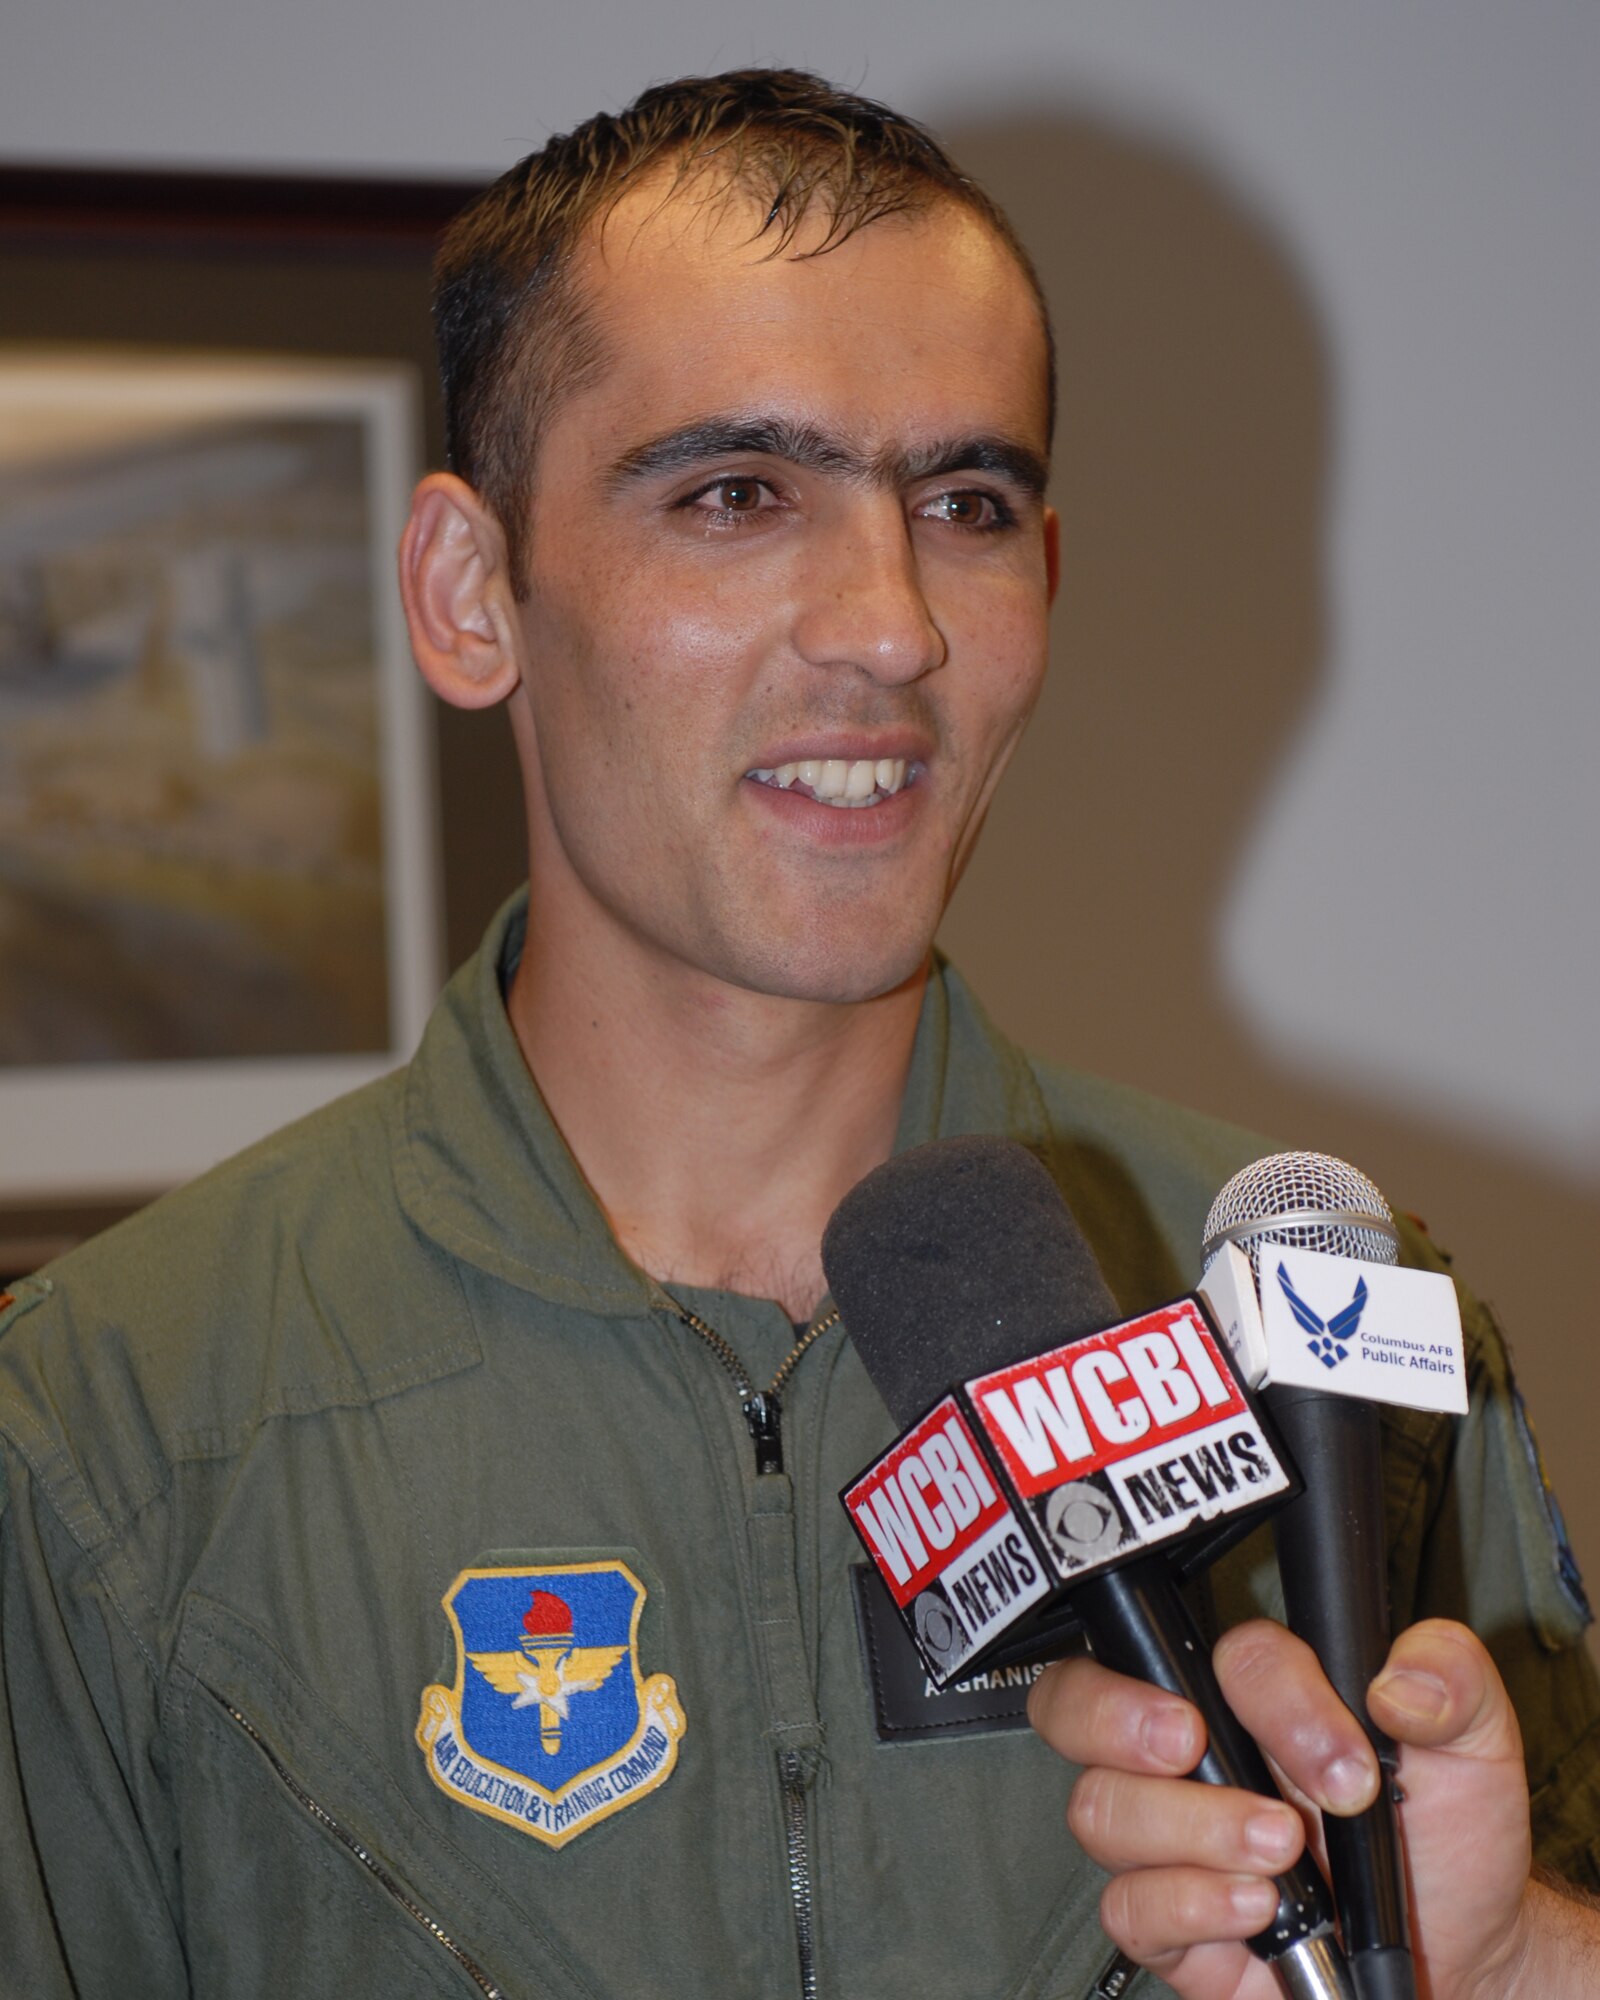 Afghan National Army Air Corps Lt. Faiz Ramaki speaks to press following his Aviation Leadership Program graduation ceremony Jun 12. Lt. Ramaki is the first Afghan student to graduate from U.S. pilot training in almost 50 years.  Lt. Ramaki will go to fly the C-27A Spartan in the Afghan Air Corps. (US Air Force Photo/Melissa Duncan)